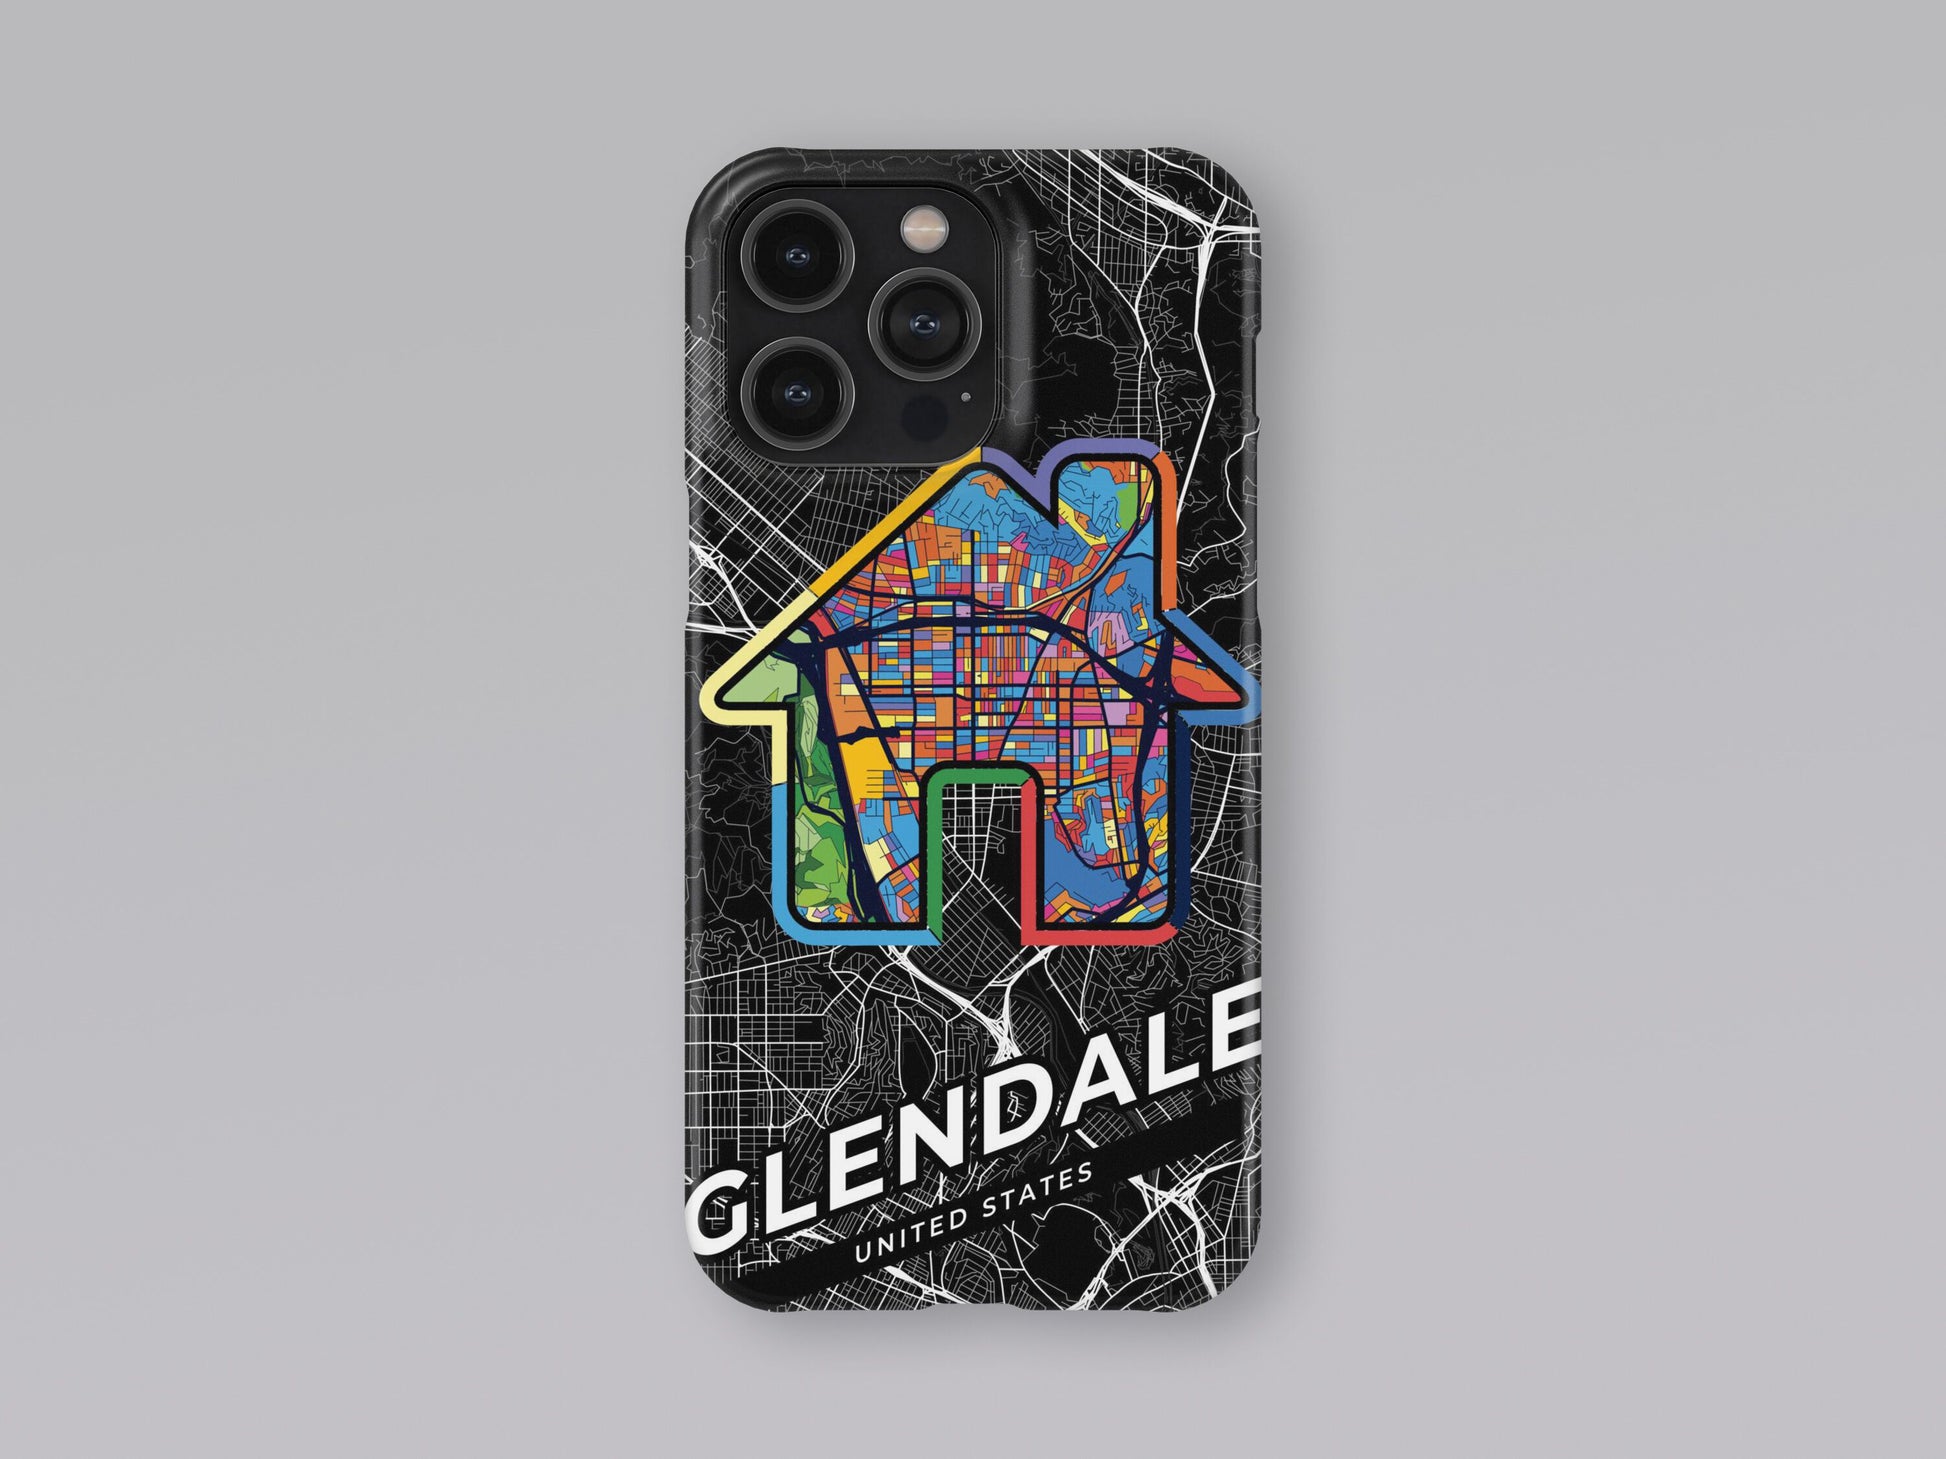 Glendale California slim phone case with colorful icon. Birthday, wedding or housewarming gift. Couple match cases. 3